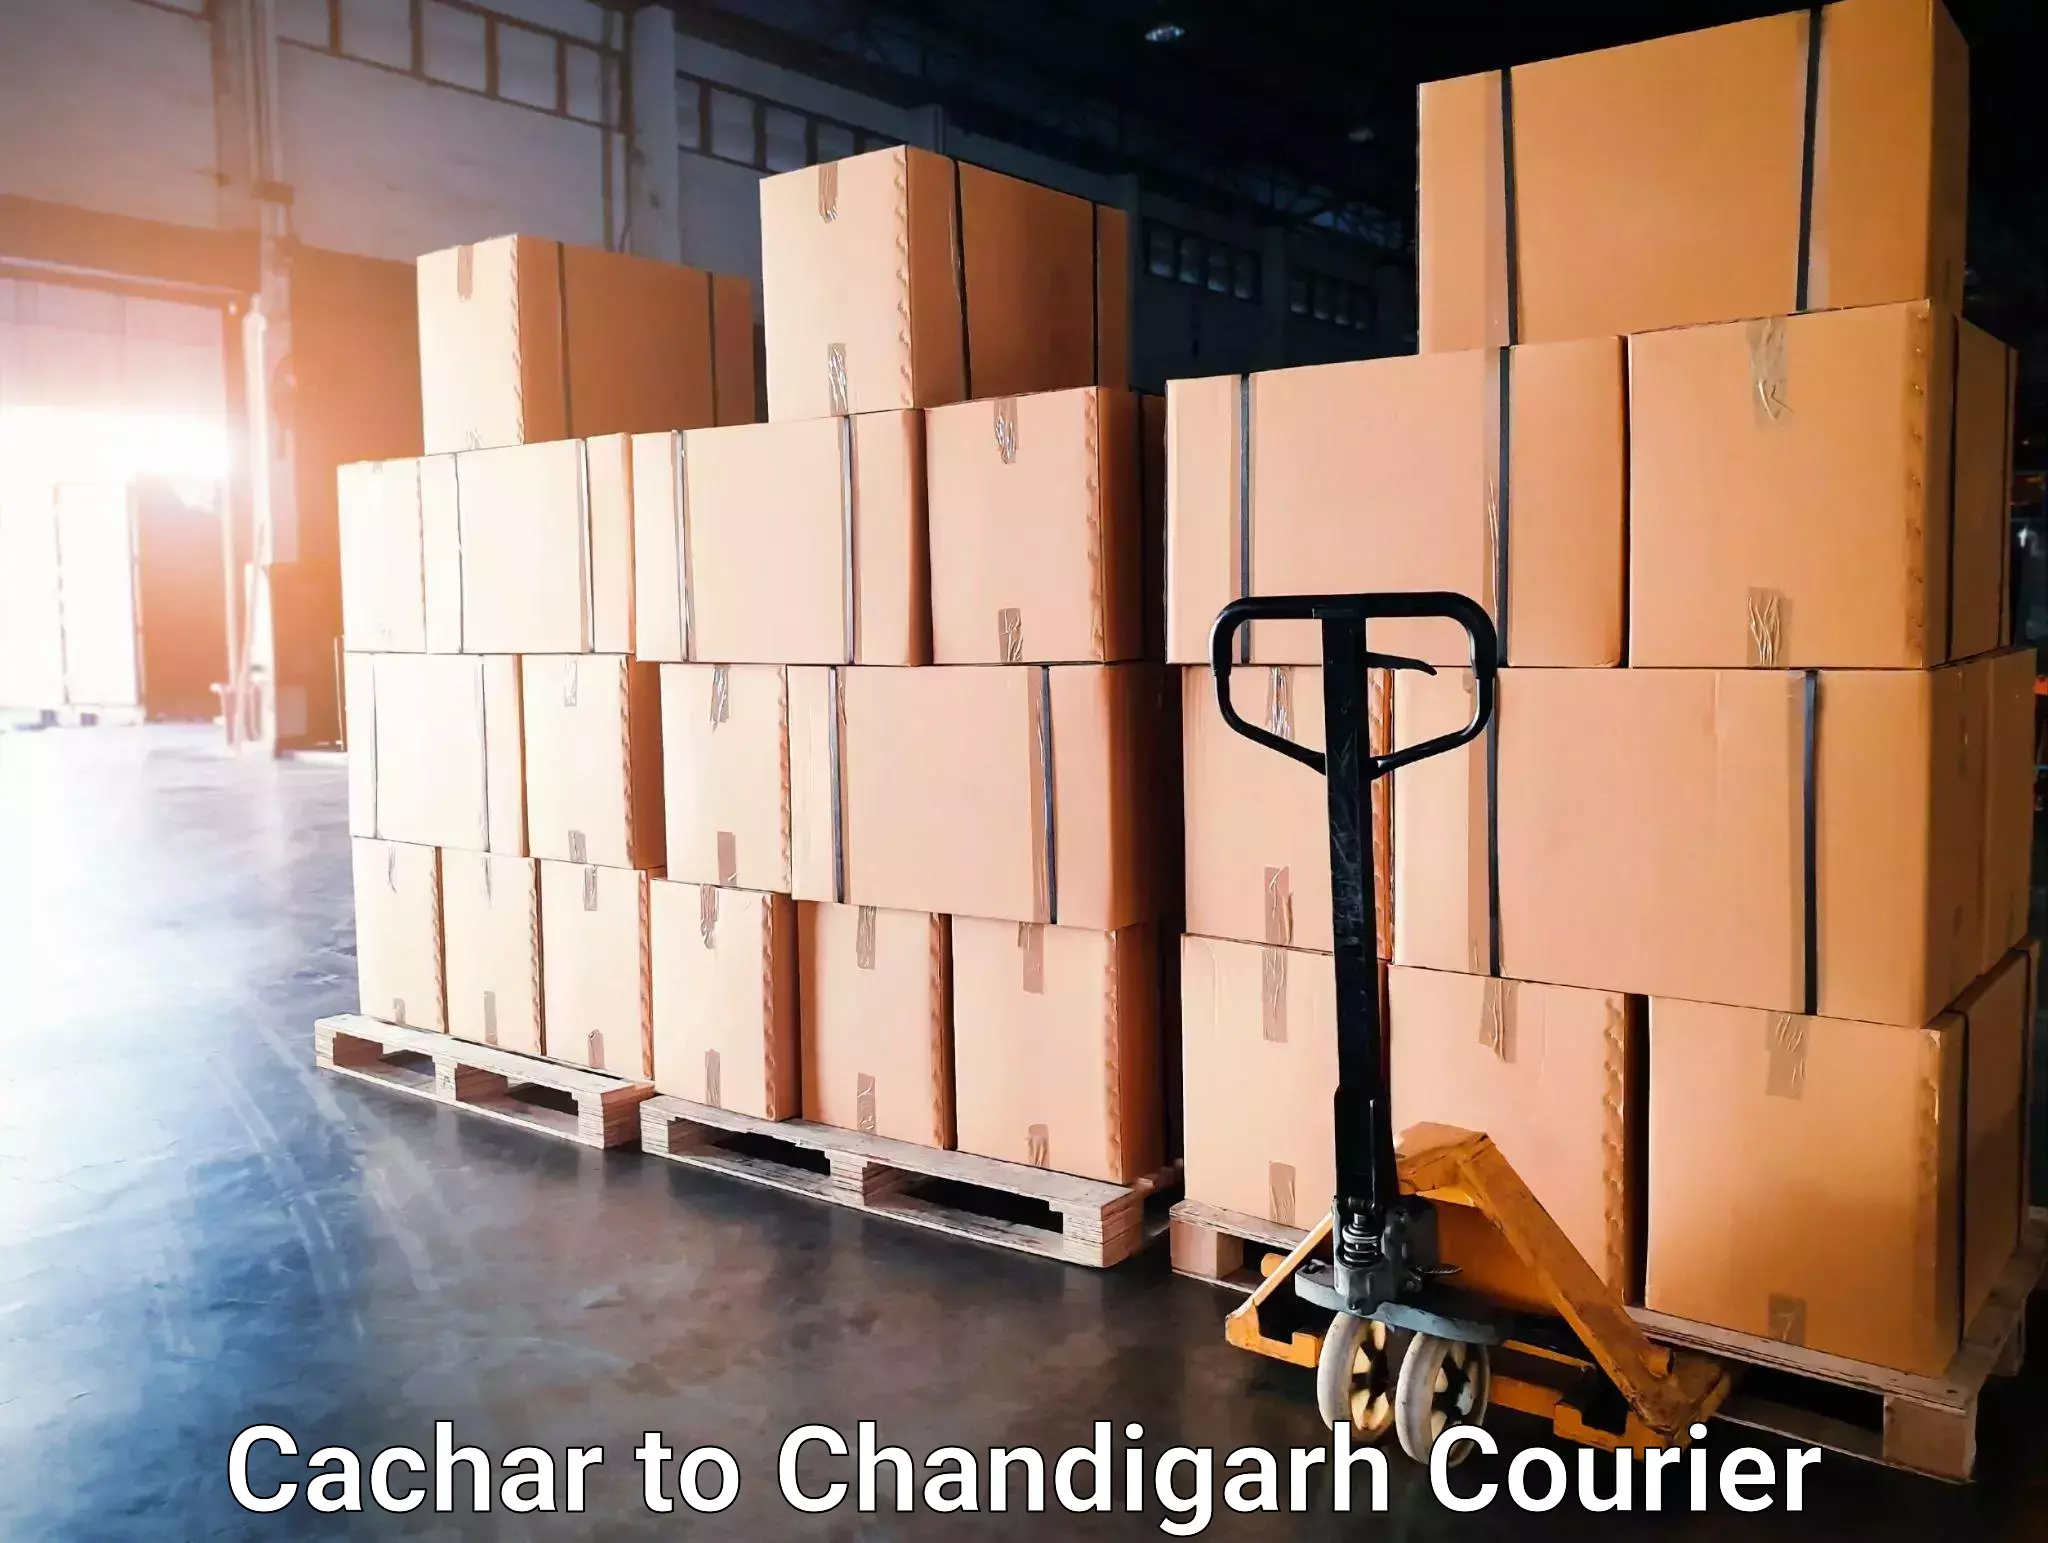 End-to-end delivery Cachar to Chandigarh